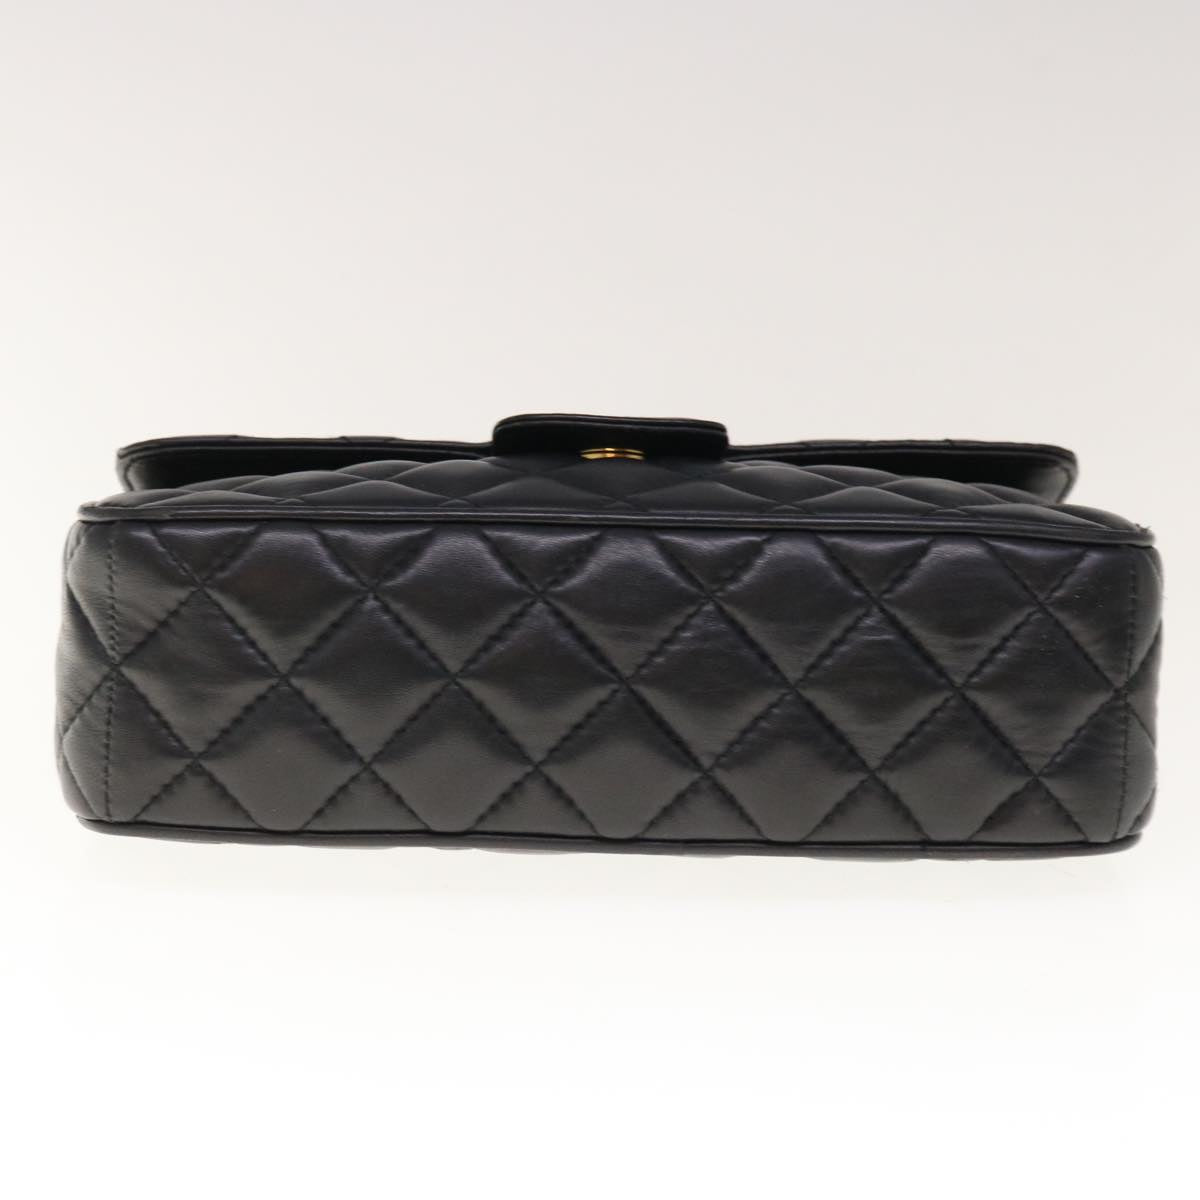 GIVENCHY Quilted Chain Shoulder Bag Leather Black Auth am5724